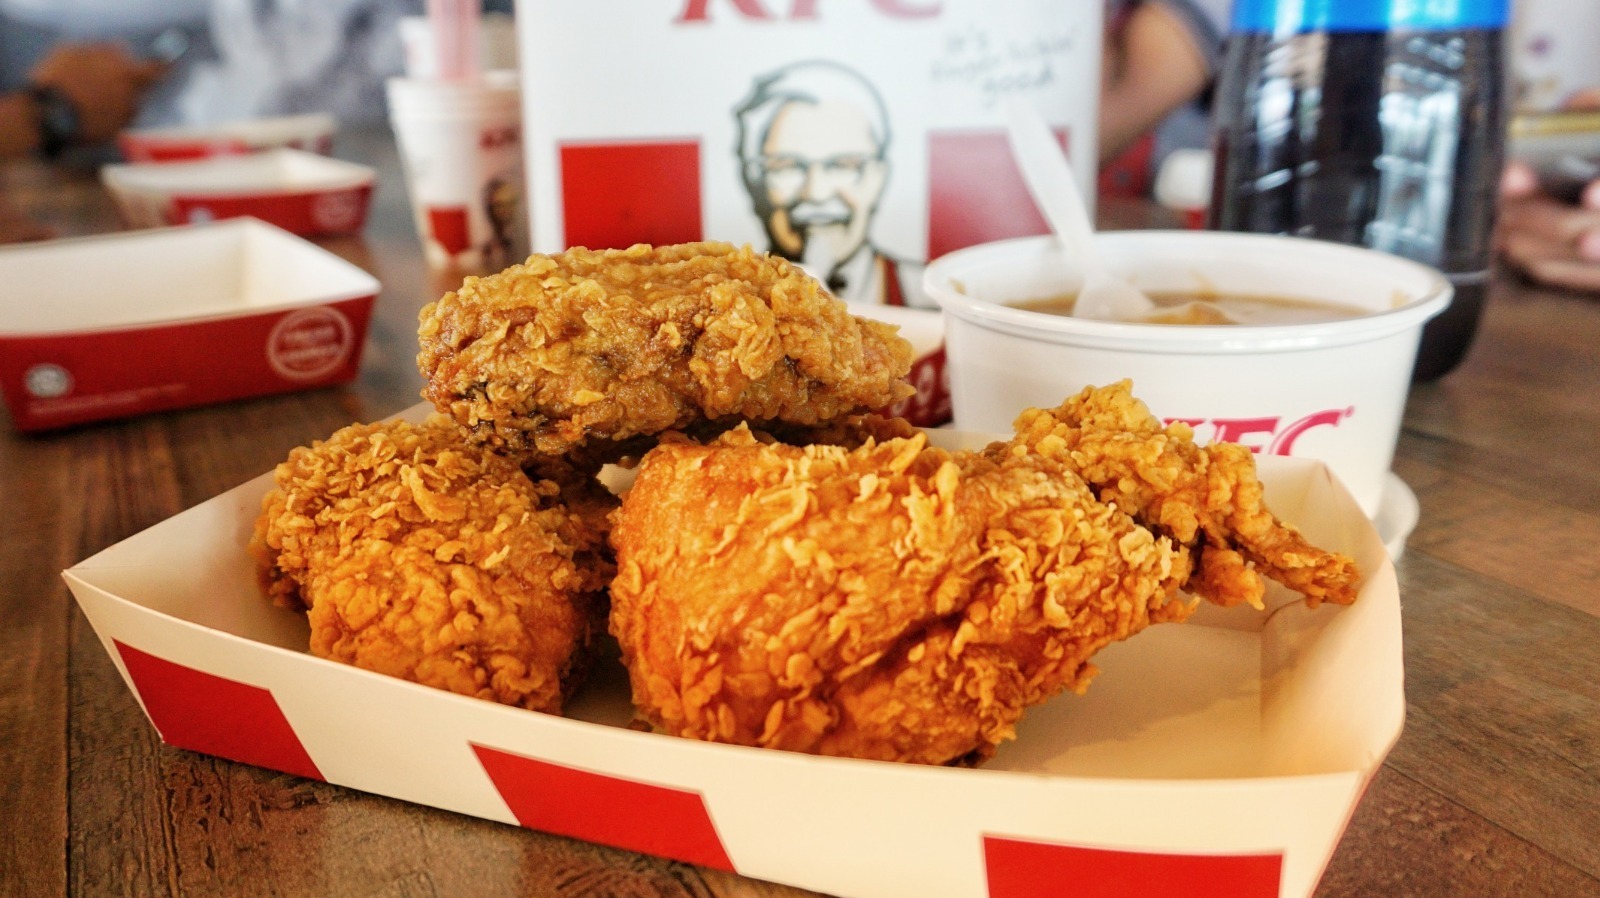 KFC South Korea Just Debuted An Unexpected New Sauce - Mashed